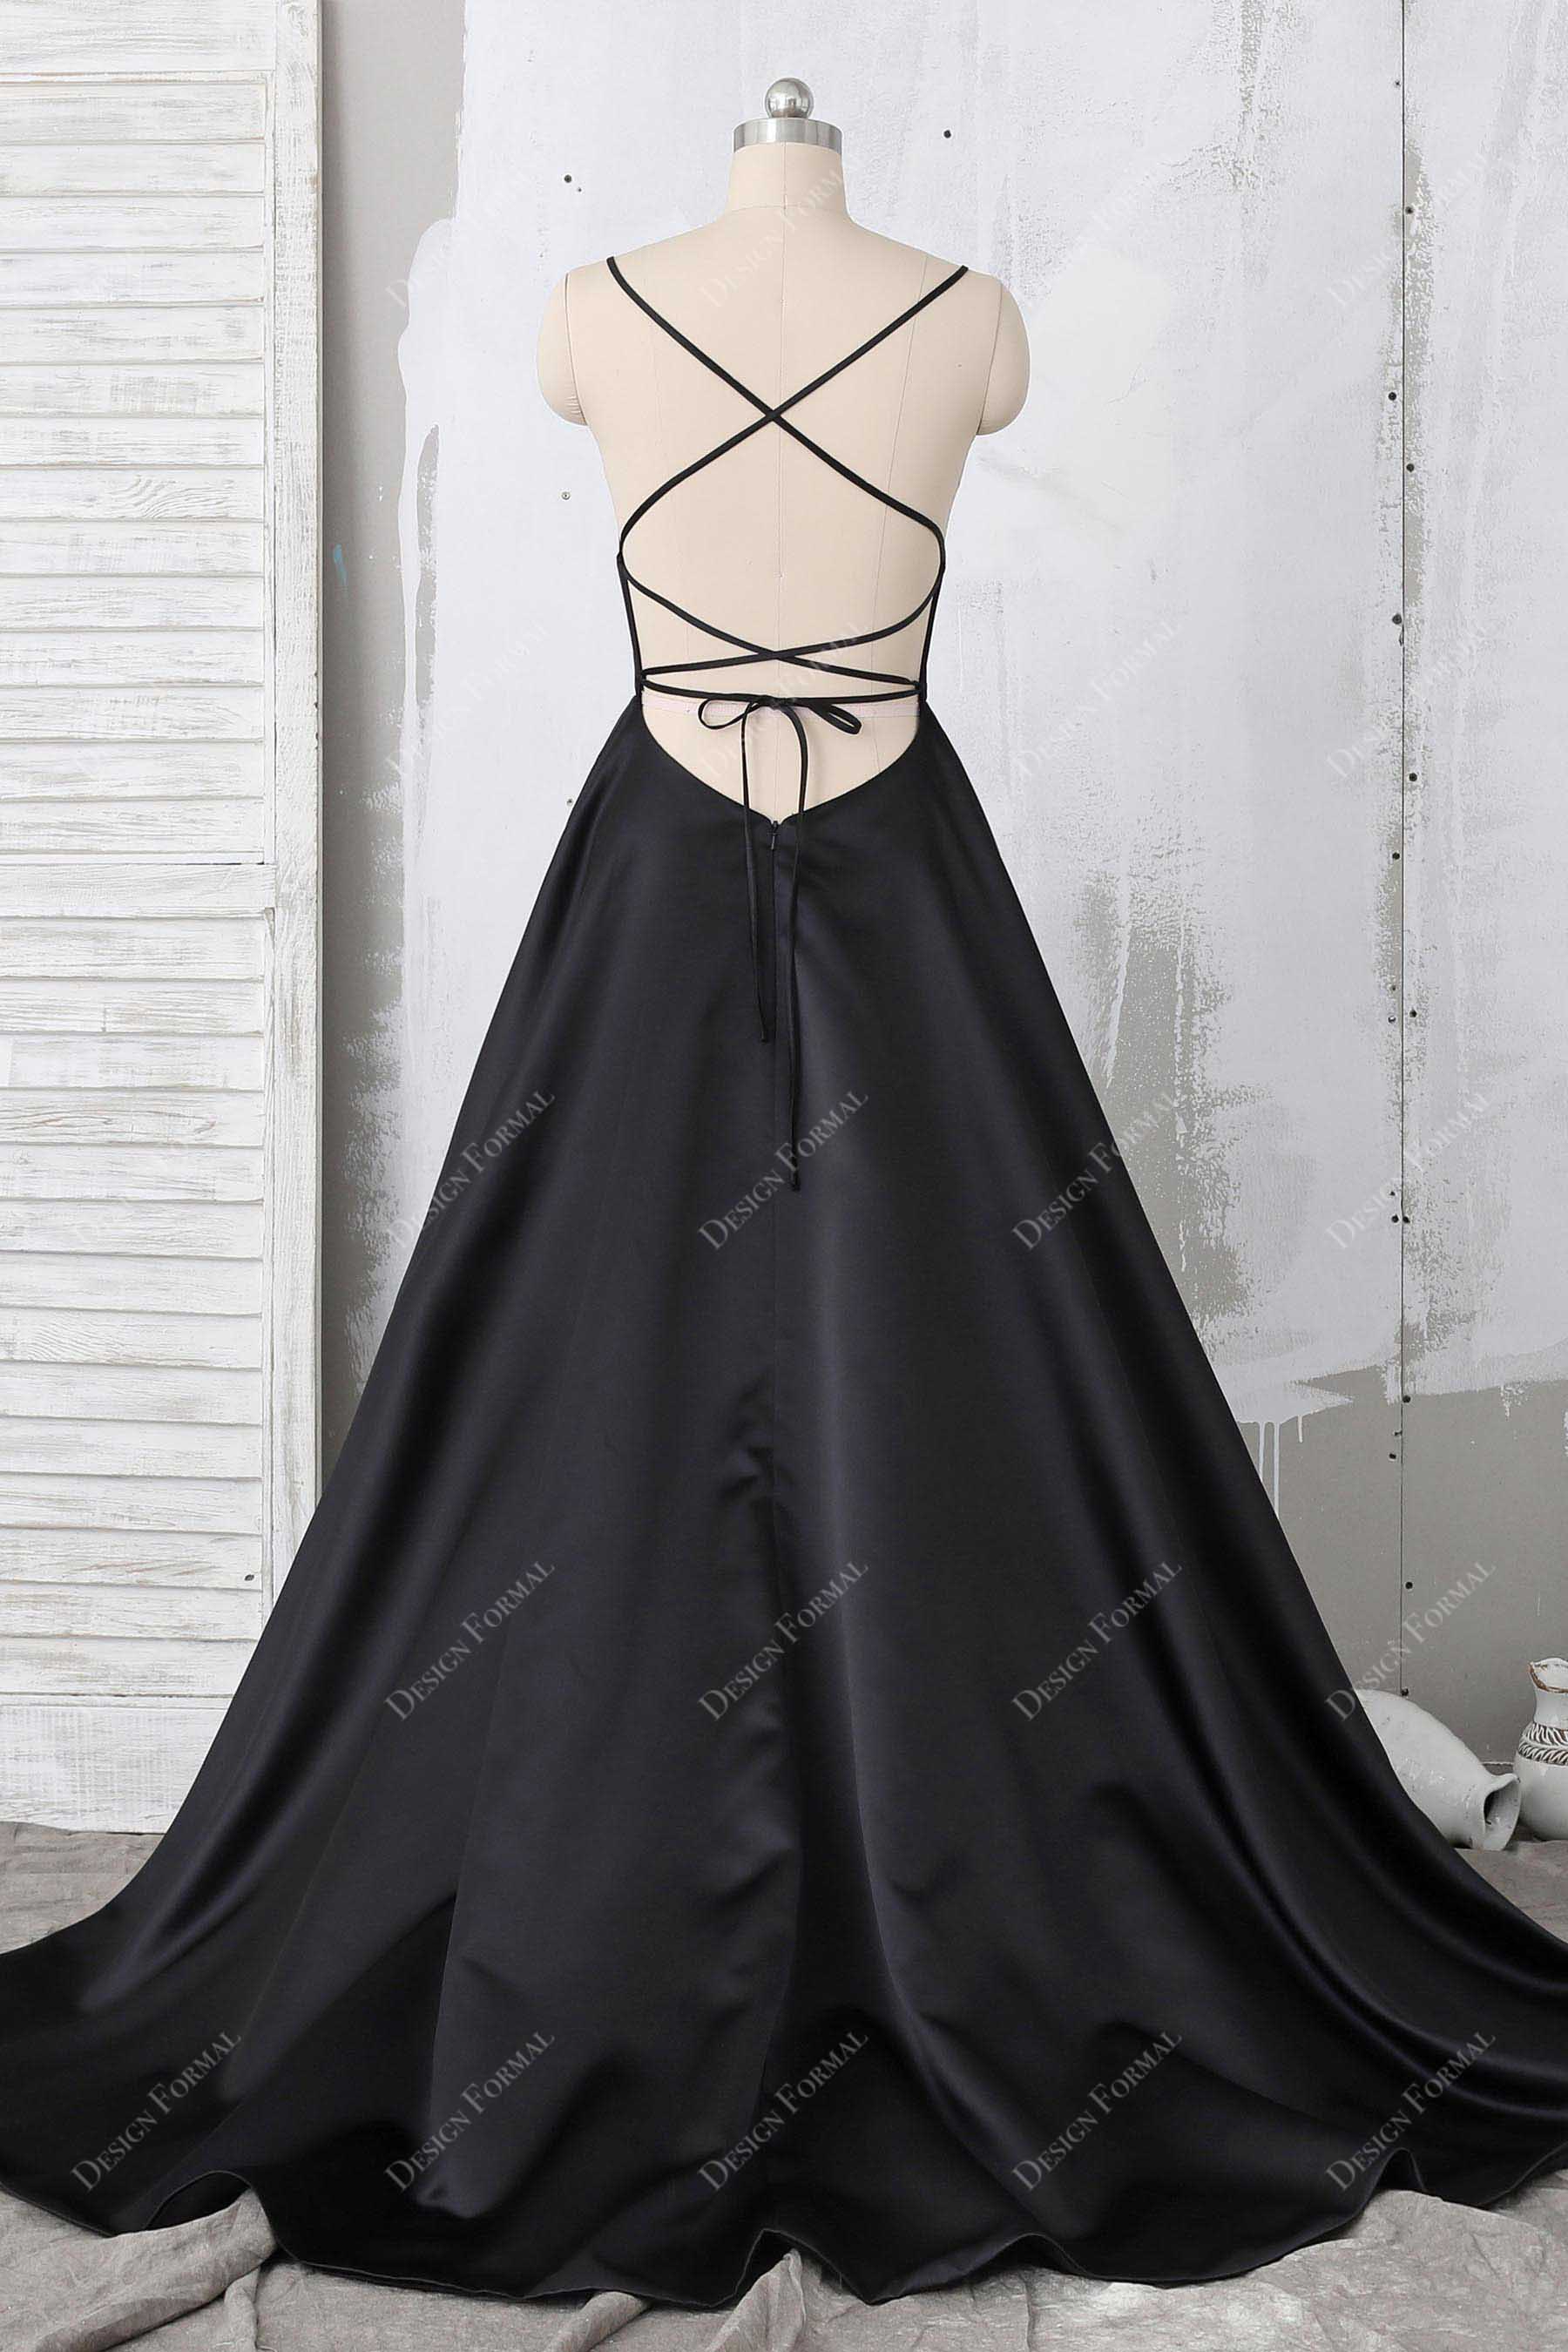 Fancy Black Beaded Lace Chiffon Unique One Sleeve A-Line Prom Dress